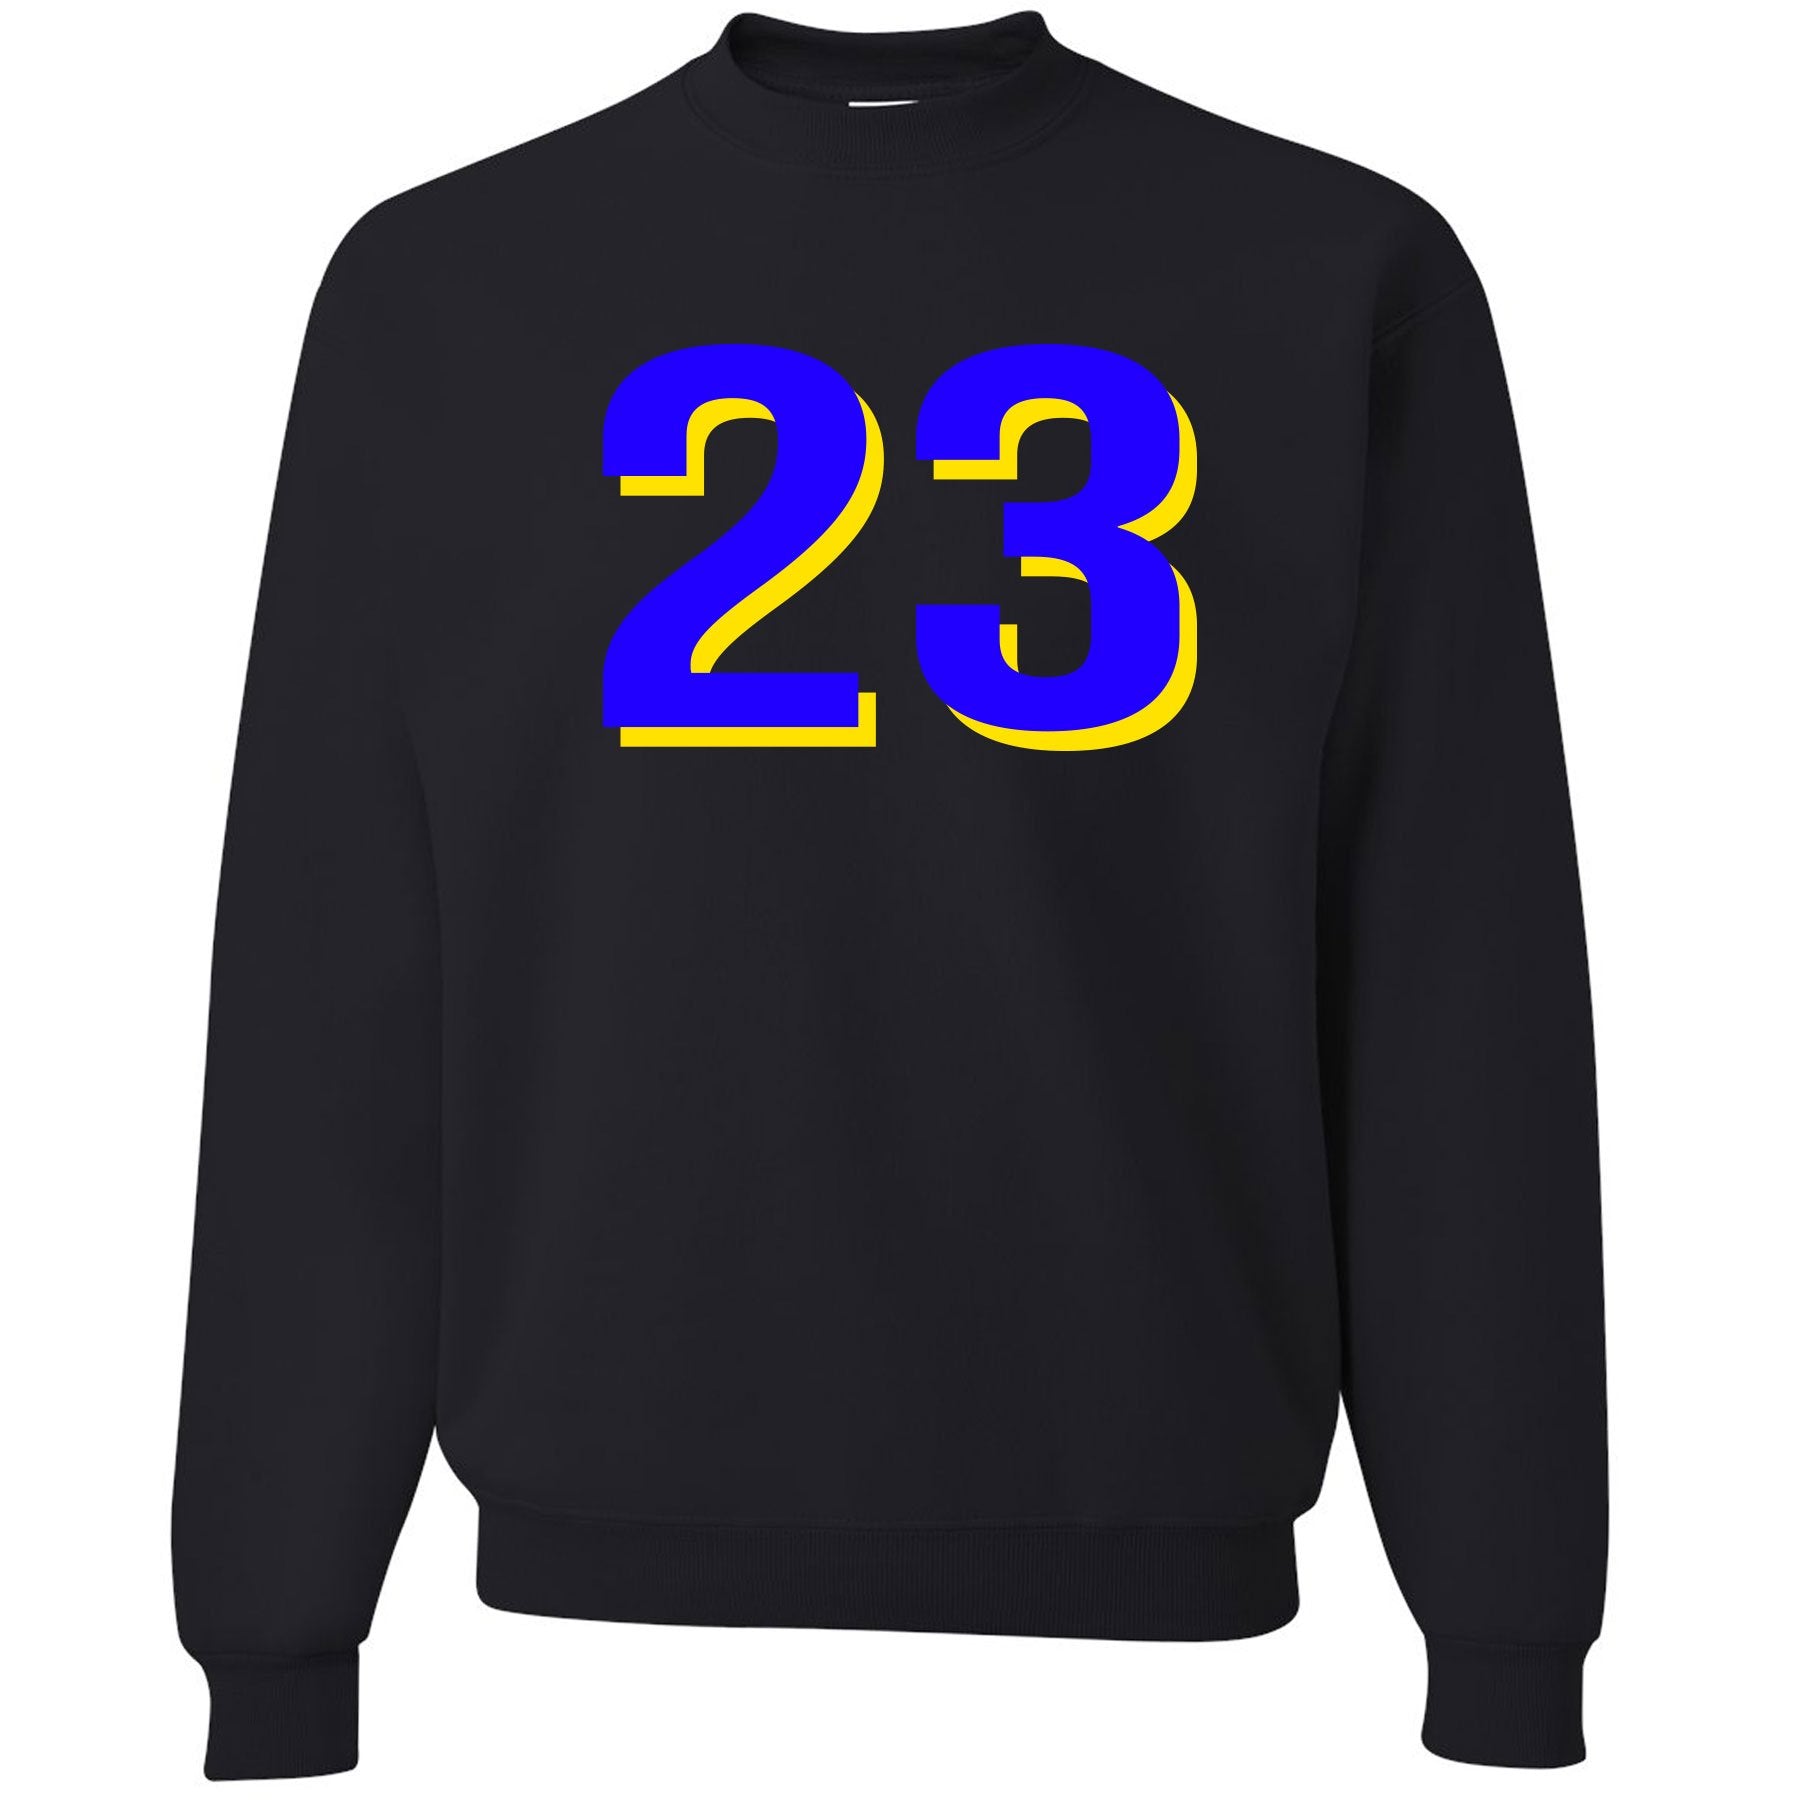 Printed on the front of the Jordan 5 Laney sneaker matching crewneck is the 23 logo printed in blue and yellow